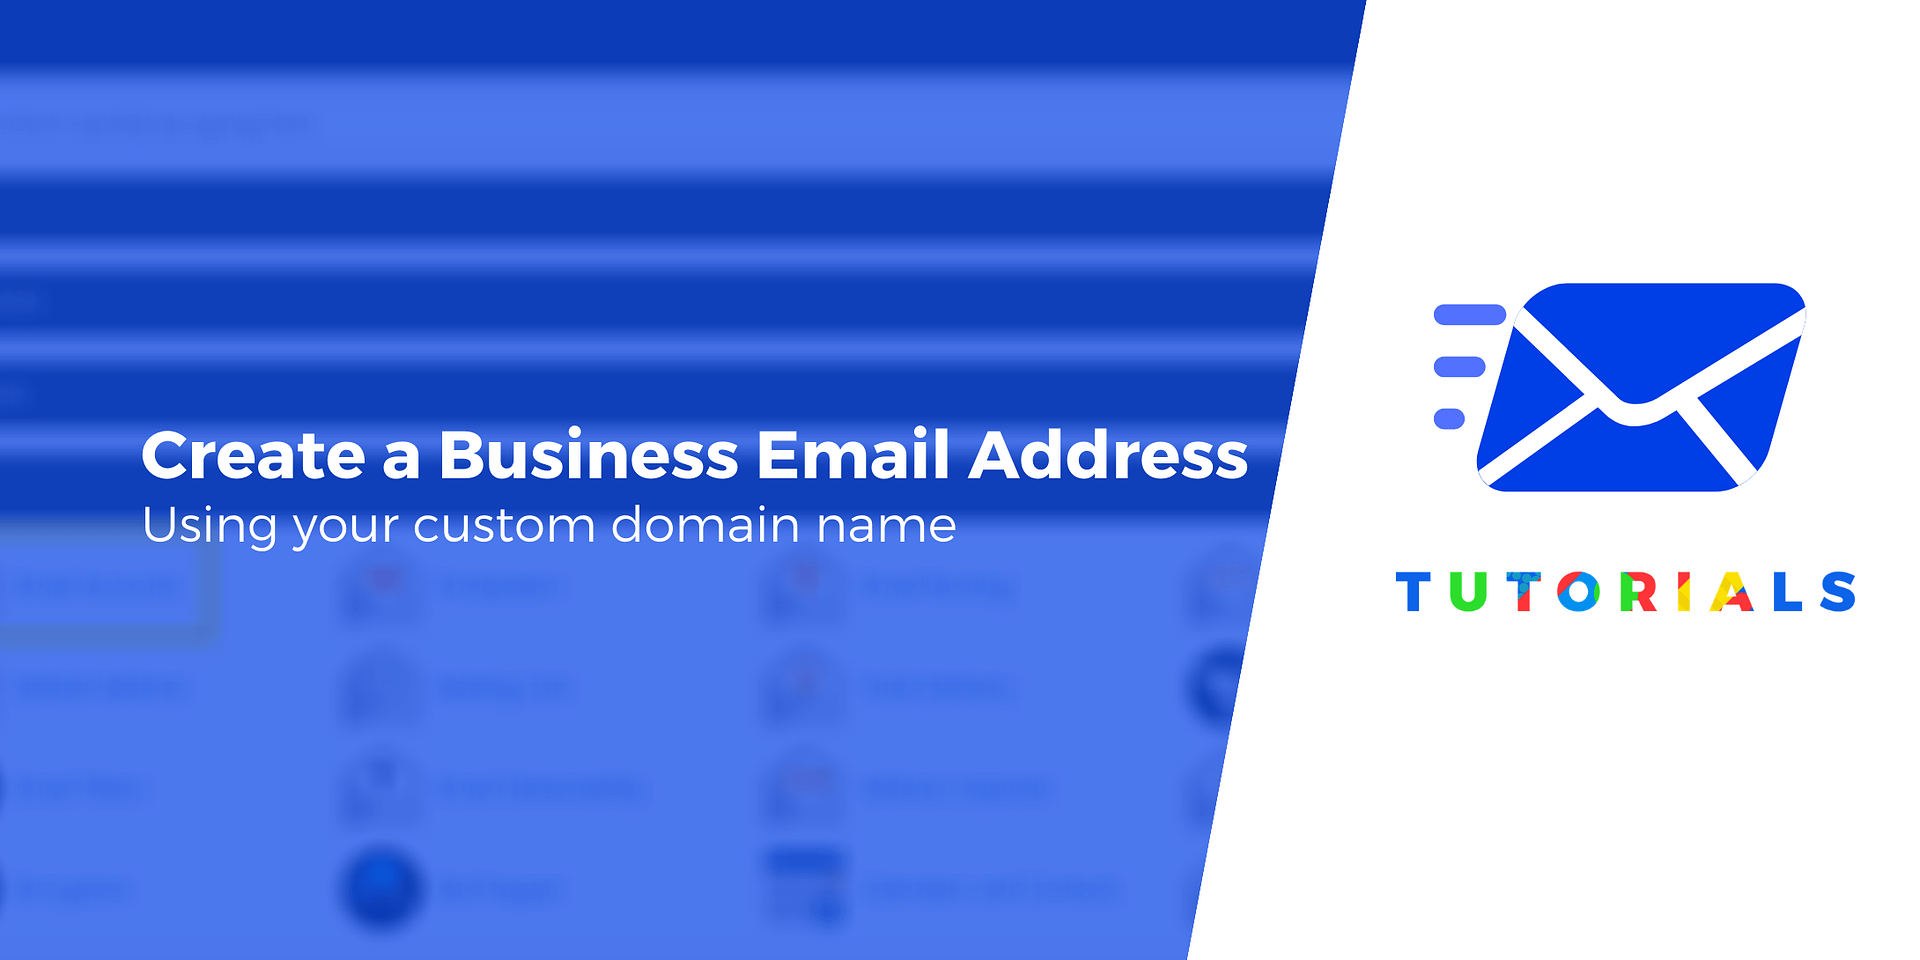 How do I get an email address with my company name in it?